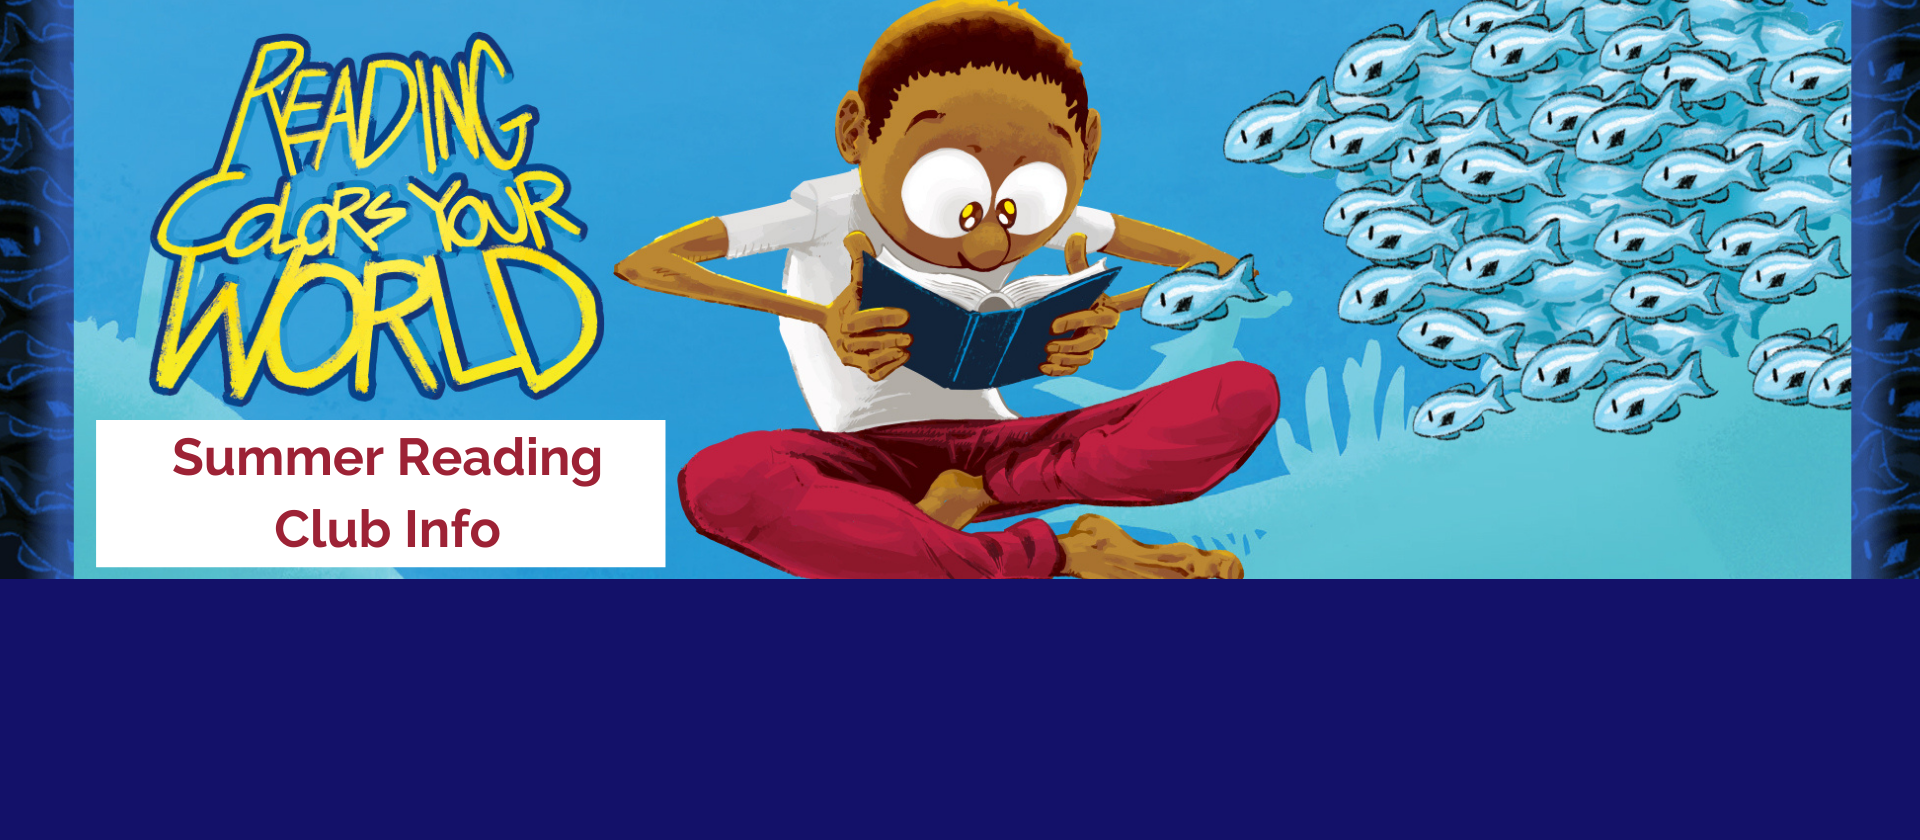 <h1>Summer Reading Club</h1>
<p>Check out the great challenges and prizes your student can learn by joining ad reading with the Summer Reading Club!</p>
<p>&nbsp;<br />
<a href="https://hcs.bps101.net/lrc/" class="button ">Read More</a></p>
